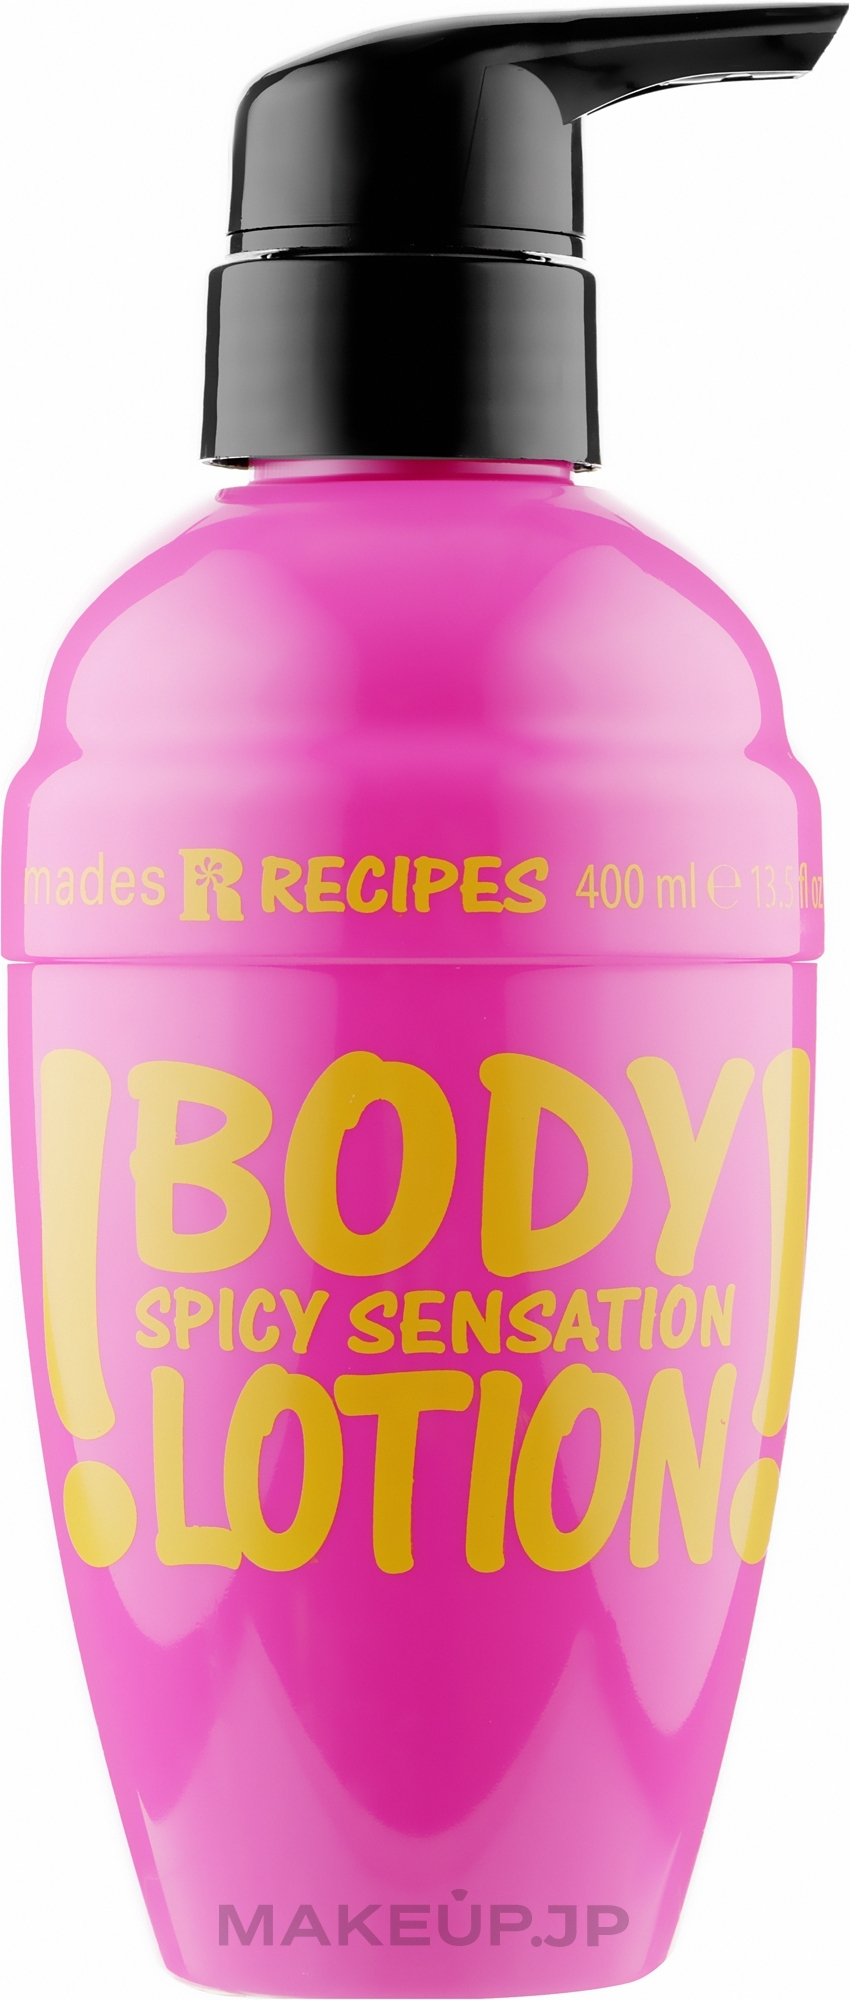 Body Lotion "Spicy Sensation" - Mades Cosmetics Recipes Spicy Sensation Body Lotion — photo 350 ml